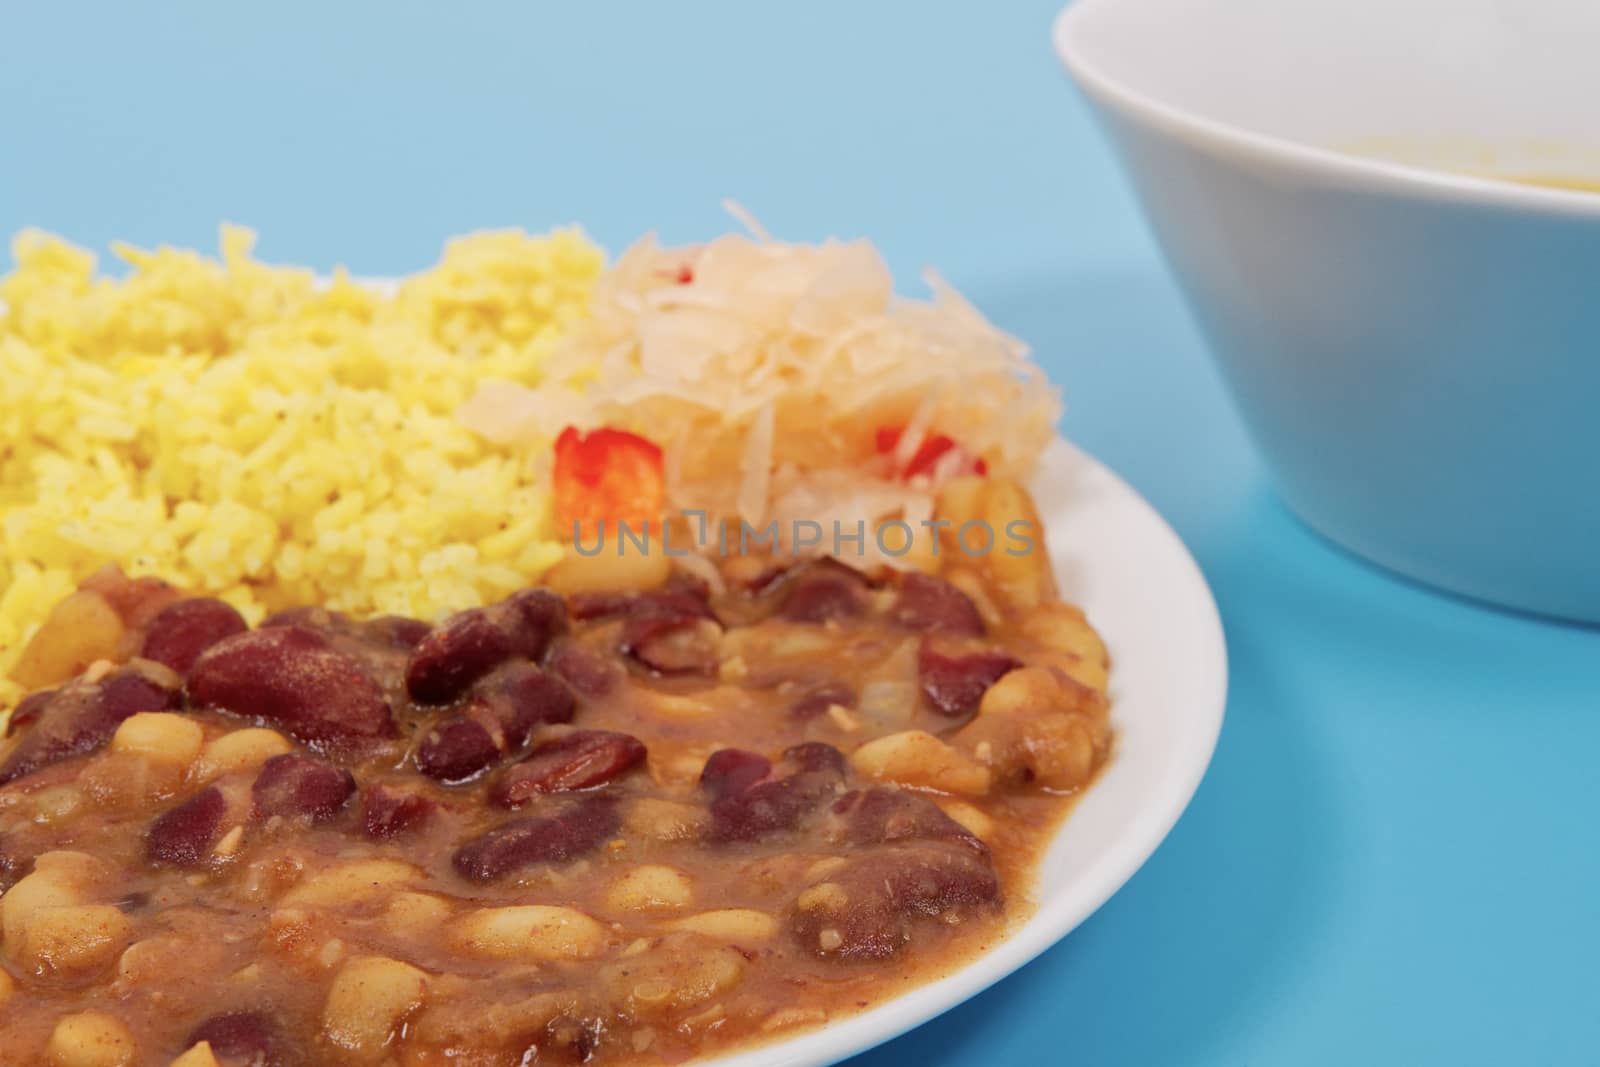 Red beans with curry rice on a blue background